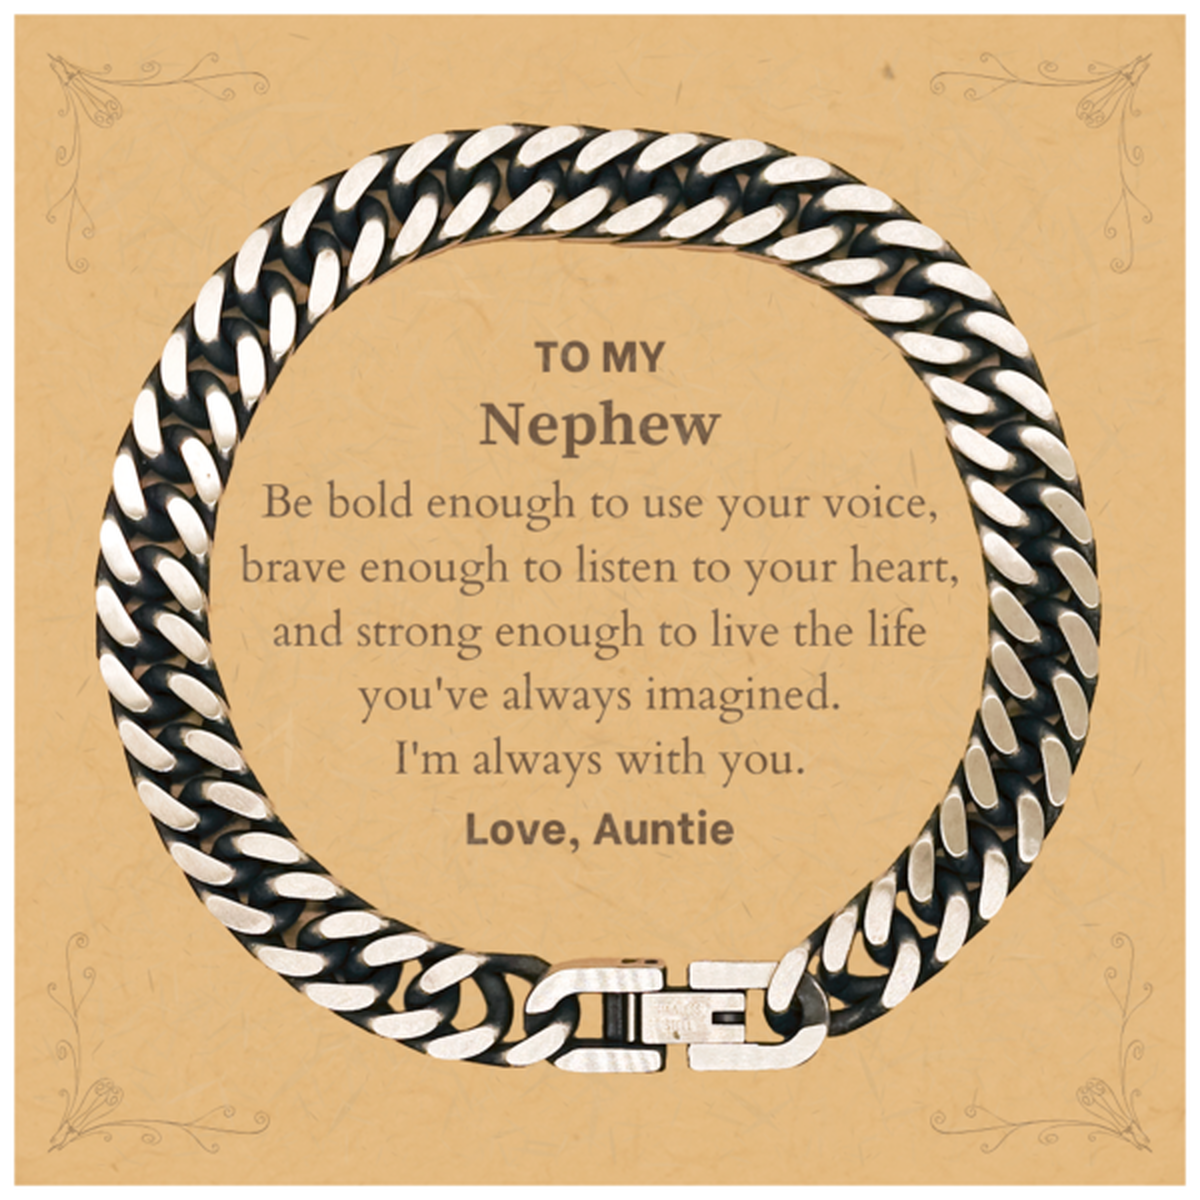 Keepsake Nephew Cuban Link Chain Bracelet Gift Idea Graduation Christmas Birthday Nephew from Auntie, Nephew Be bold enough to use your voice, brave enough to listen to your heart. Love, Auntie